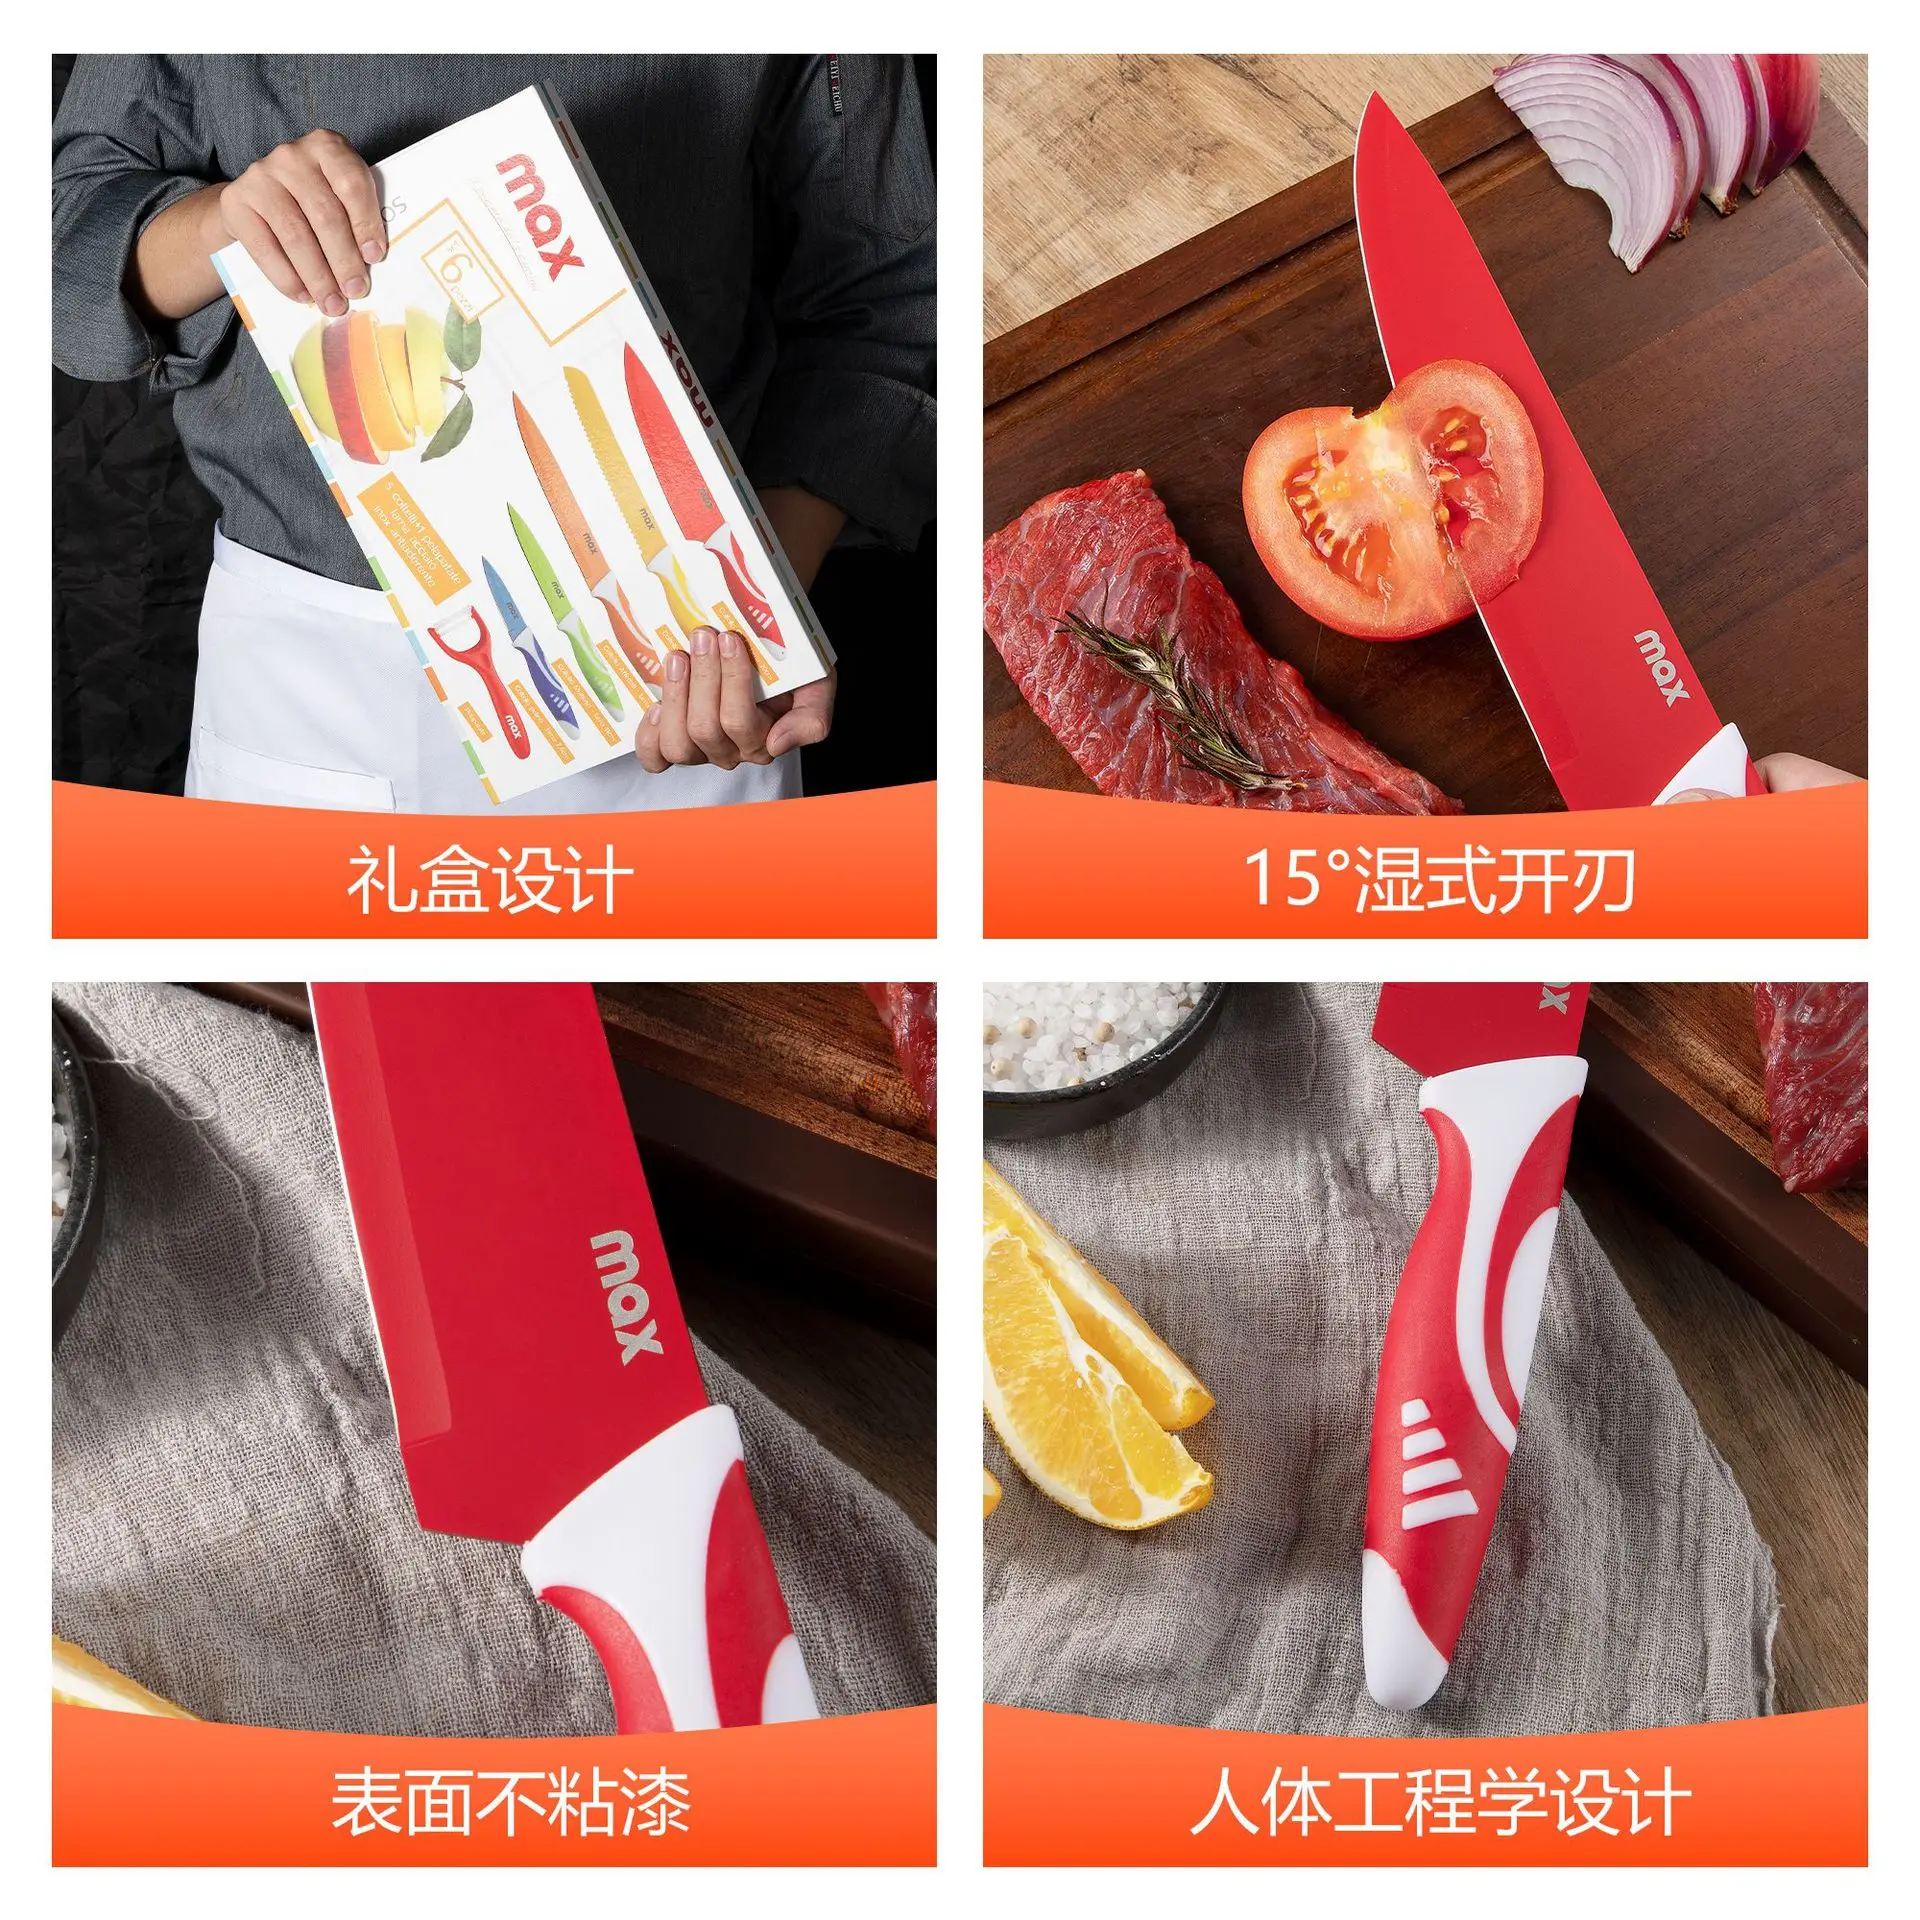 https://ae01.alicdn.com/kf/S38acf6bd9f1b439dbcb7c2f8b97dba4cF/Colorful-Kitchen-Knife-Set-Non-Stick-Coating-Blade-6-PCS-Gift-Knife-Chef-Slicing-Bread-Utility.jpg